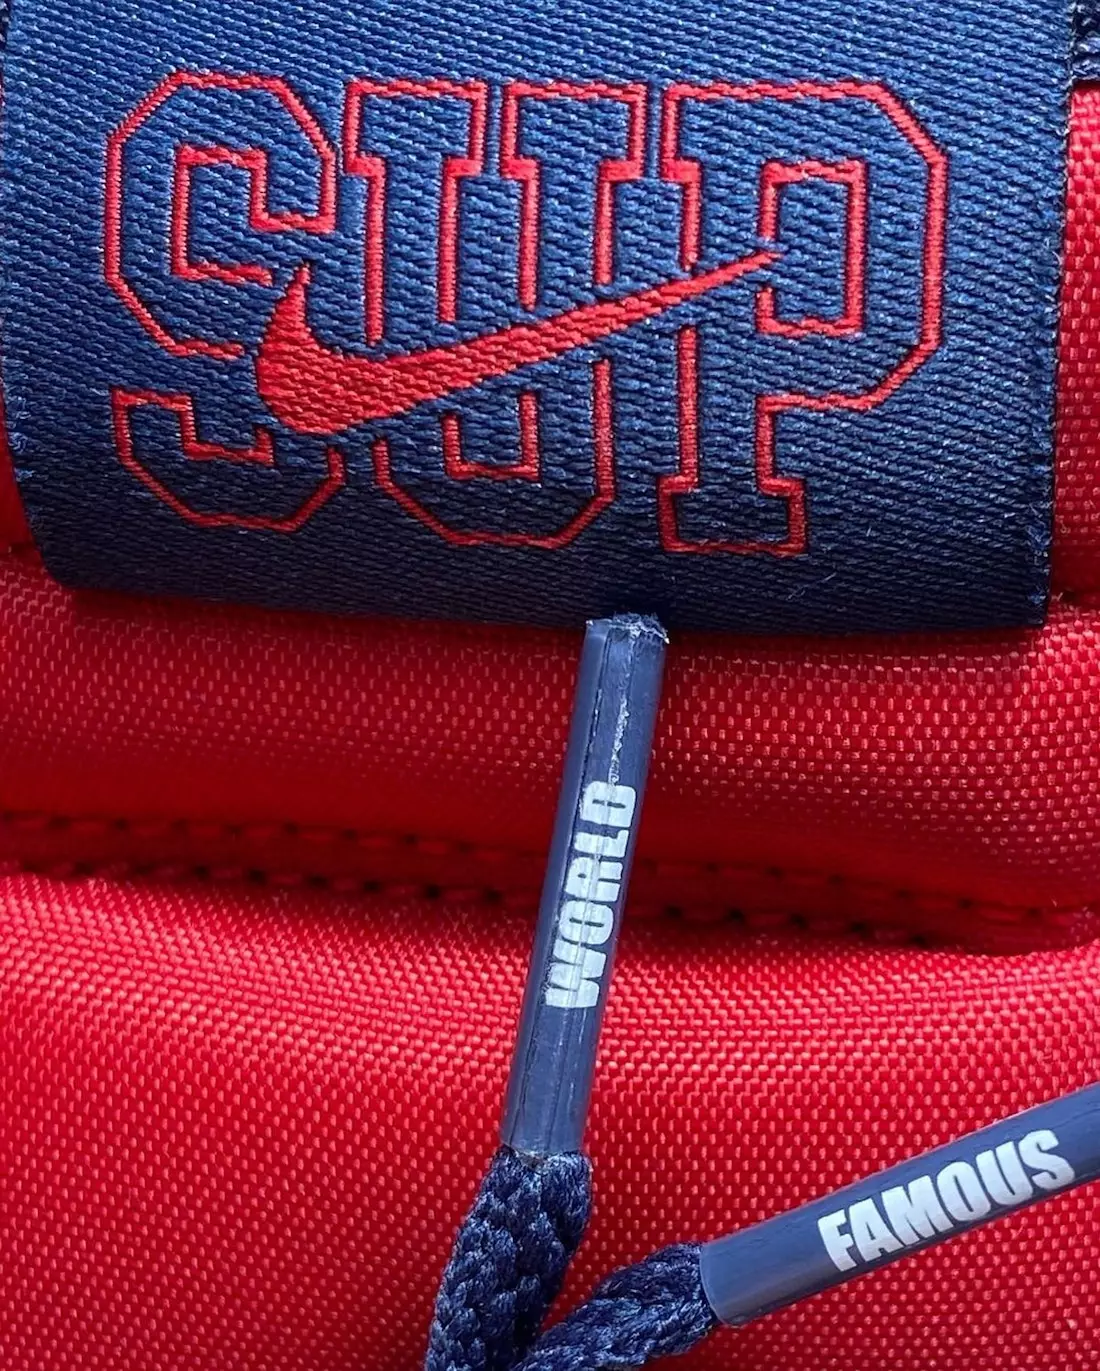 Supreme Nike SB Dunk High By Any Means Navy Red Дата випуску